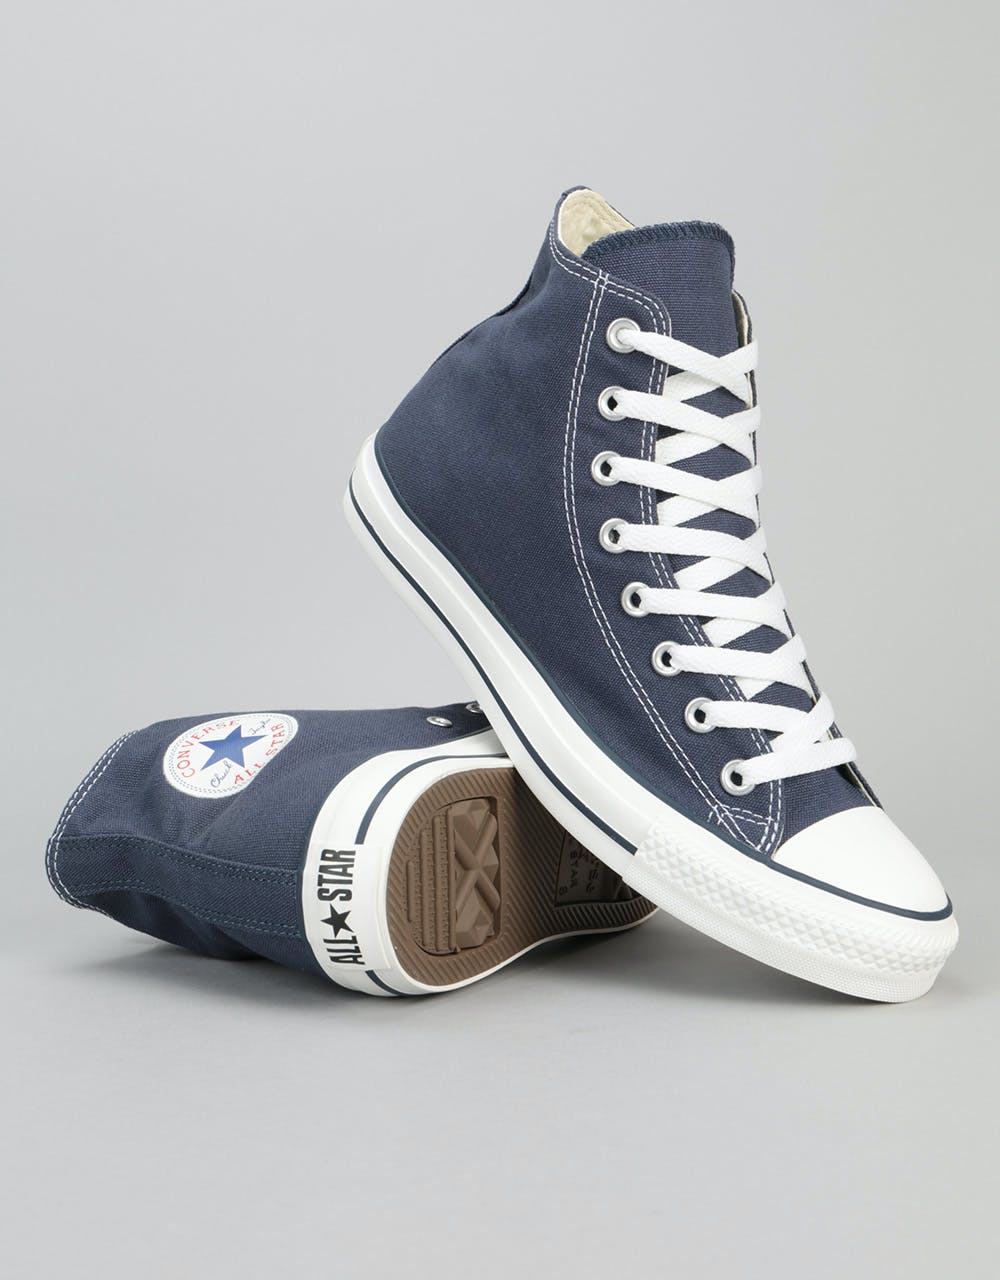 Converse All Star Hi-Top Trainers - Navy